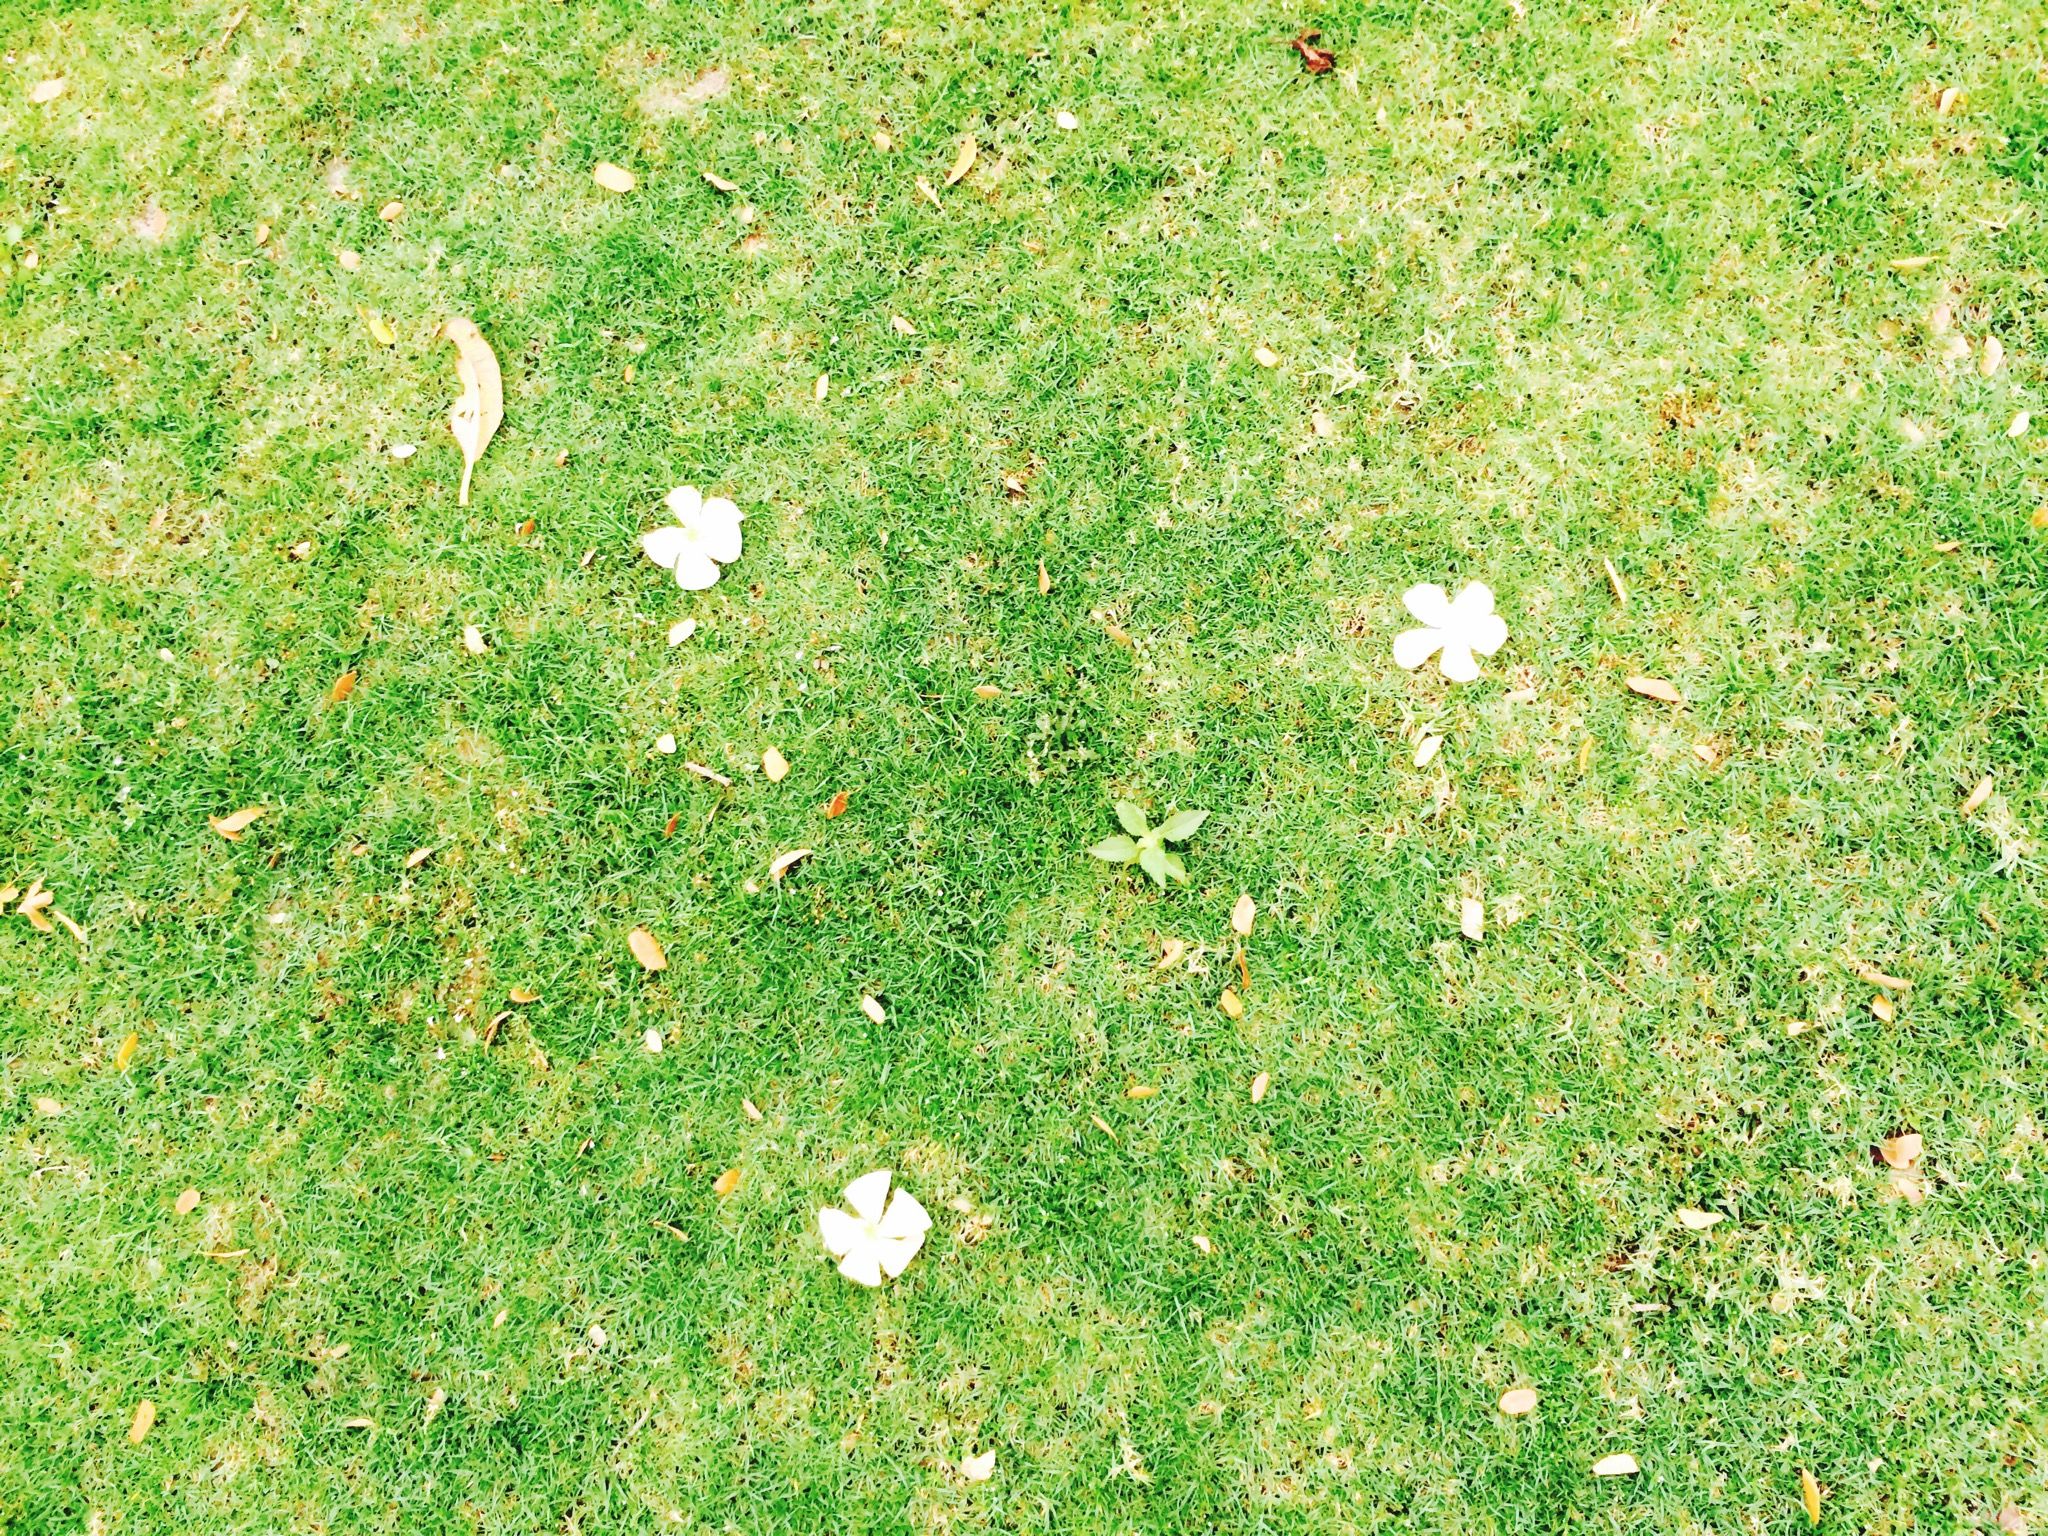 grass, field, white color, grassy, high angle view, green color, growth, nature, white, beauty in nature, day, outdoors, fragility, mushroom, no people, plant, leaf, tranquility, ground, close-up